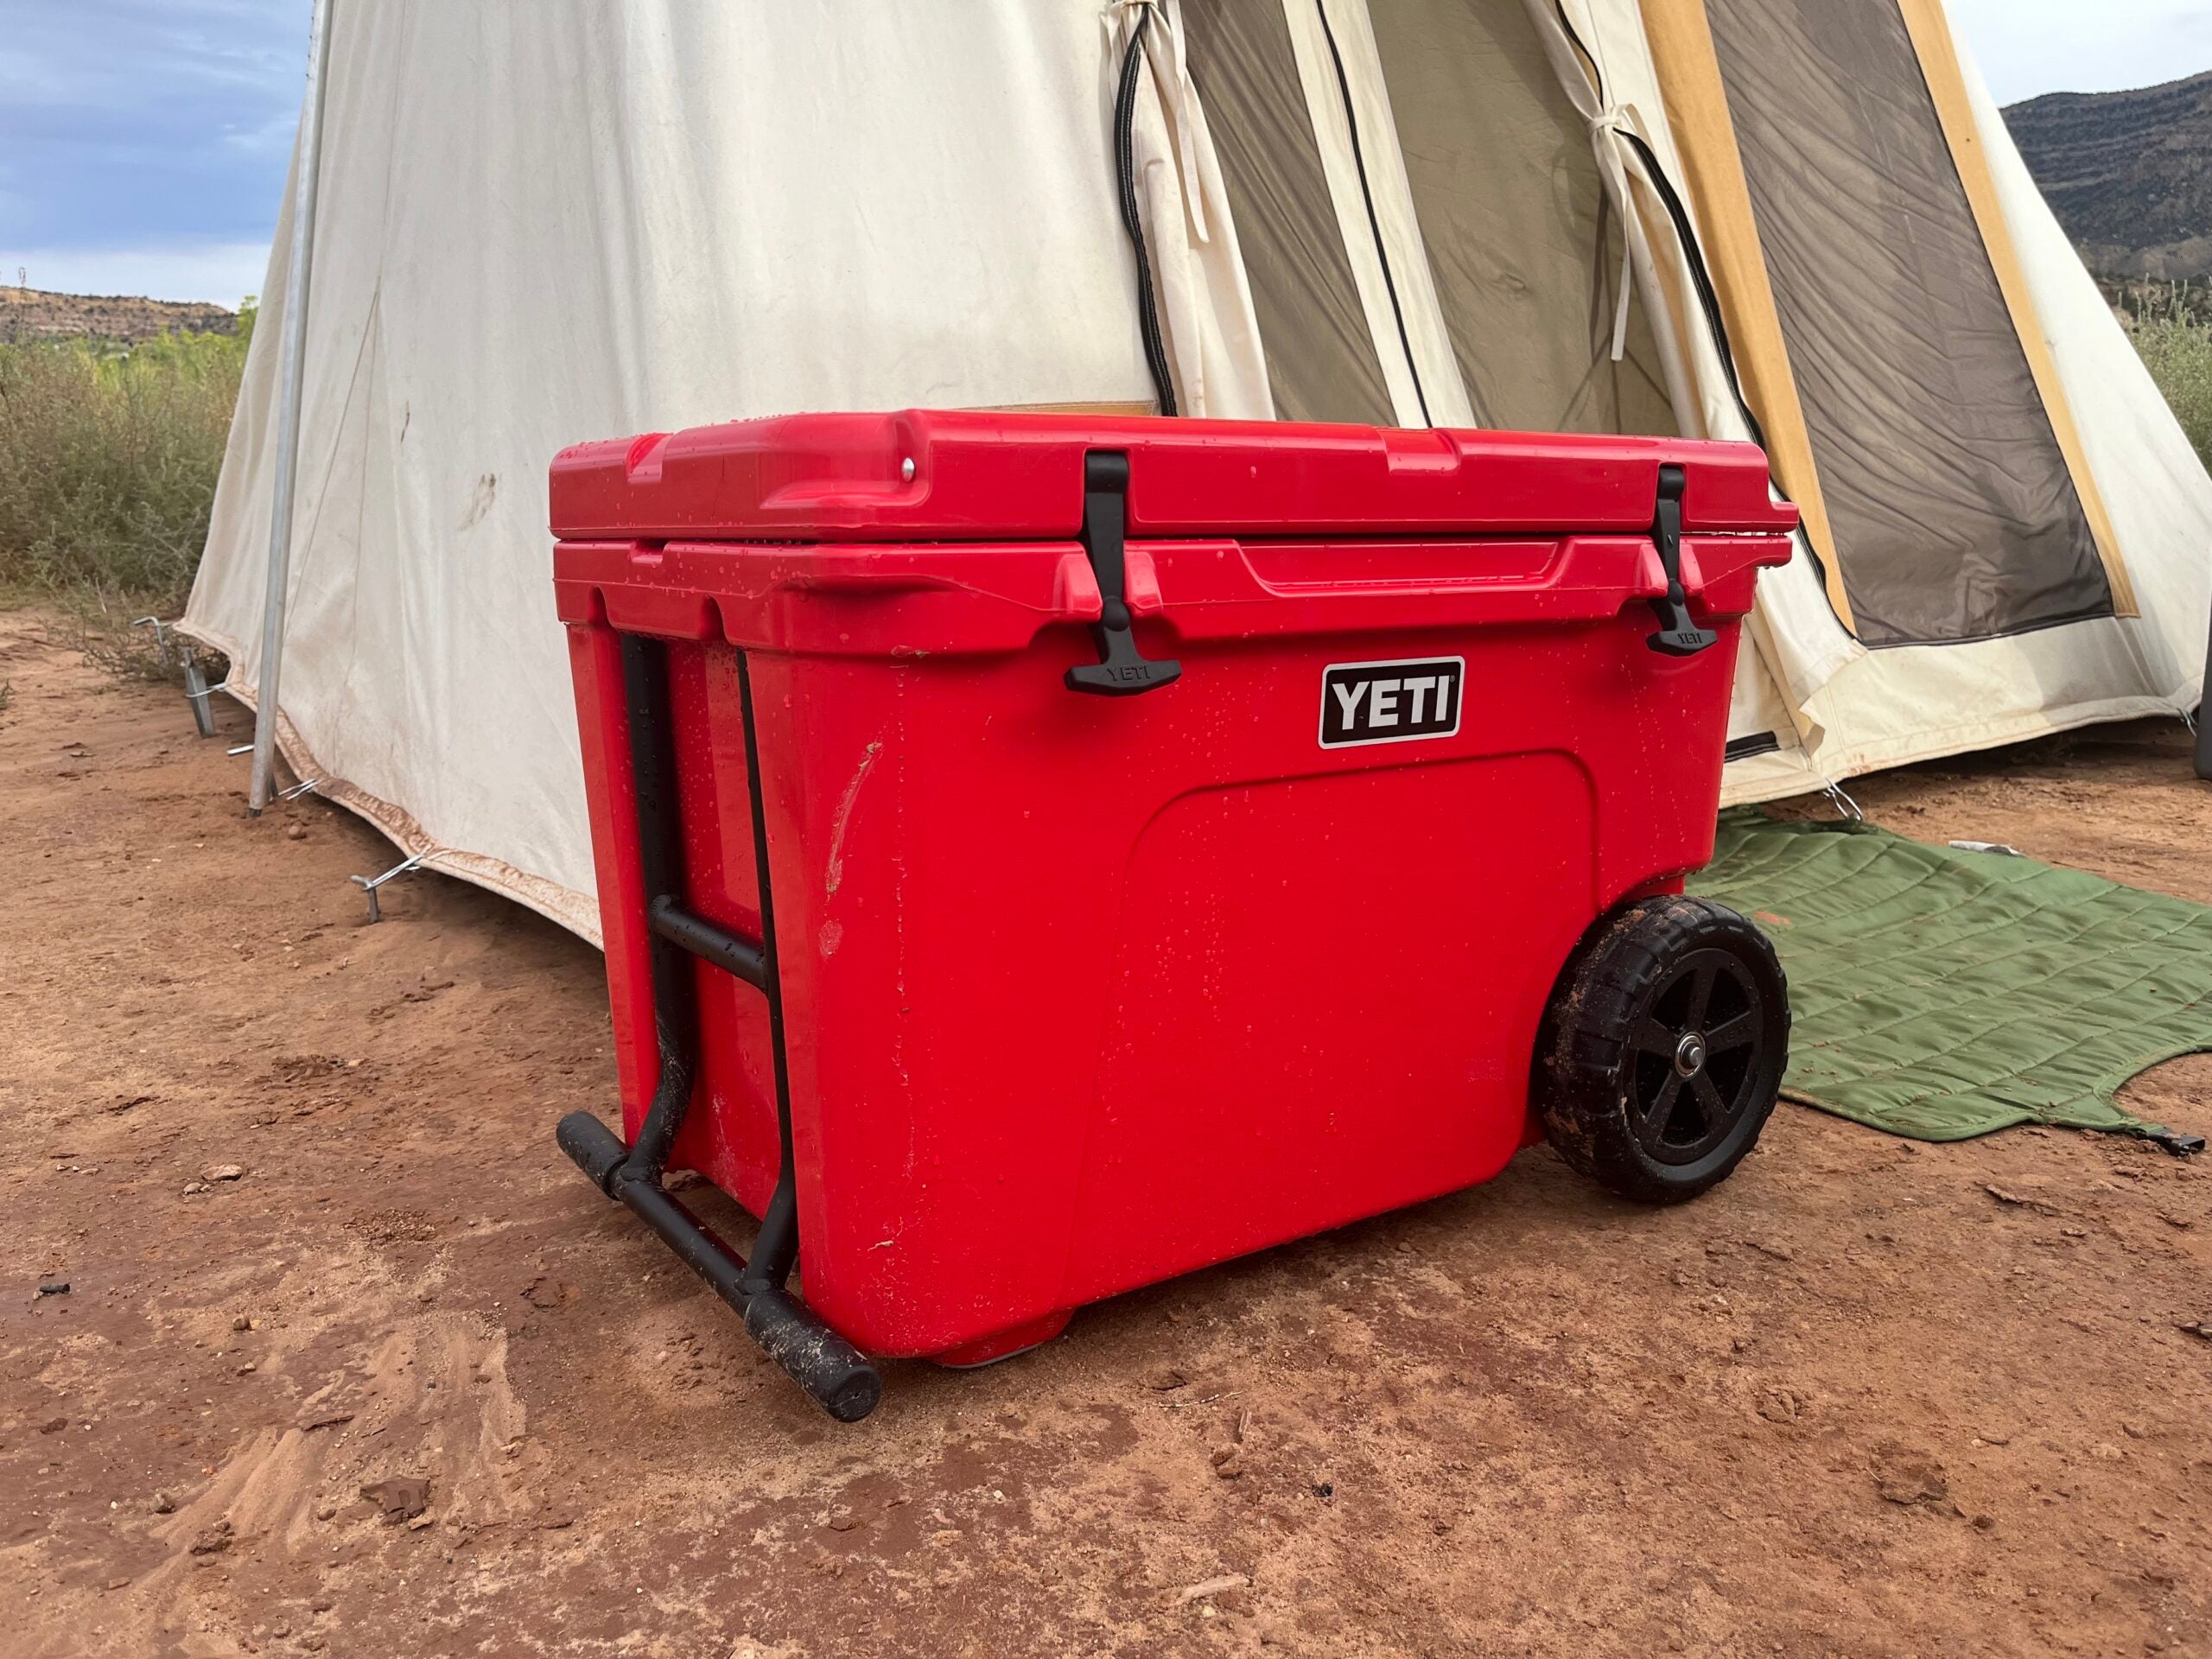 We tested the best Yeti coolers to make your choices easier.